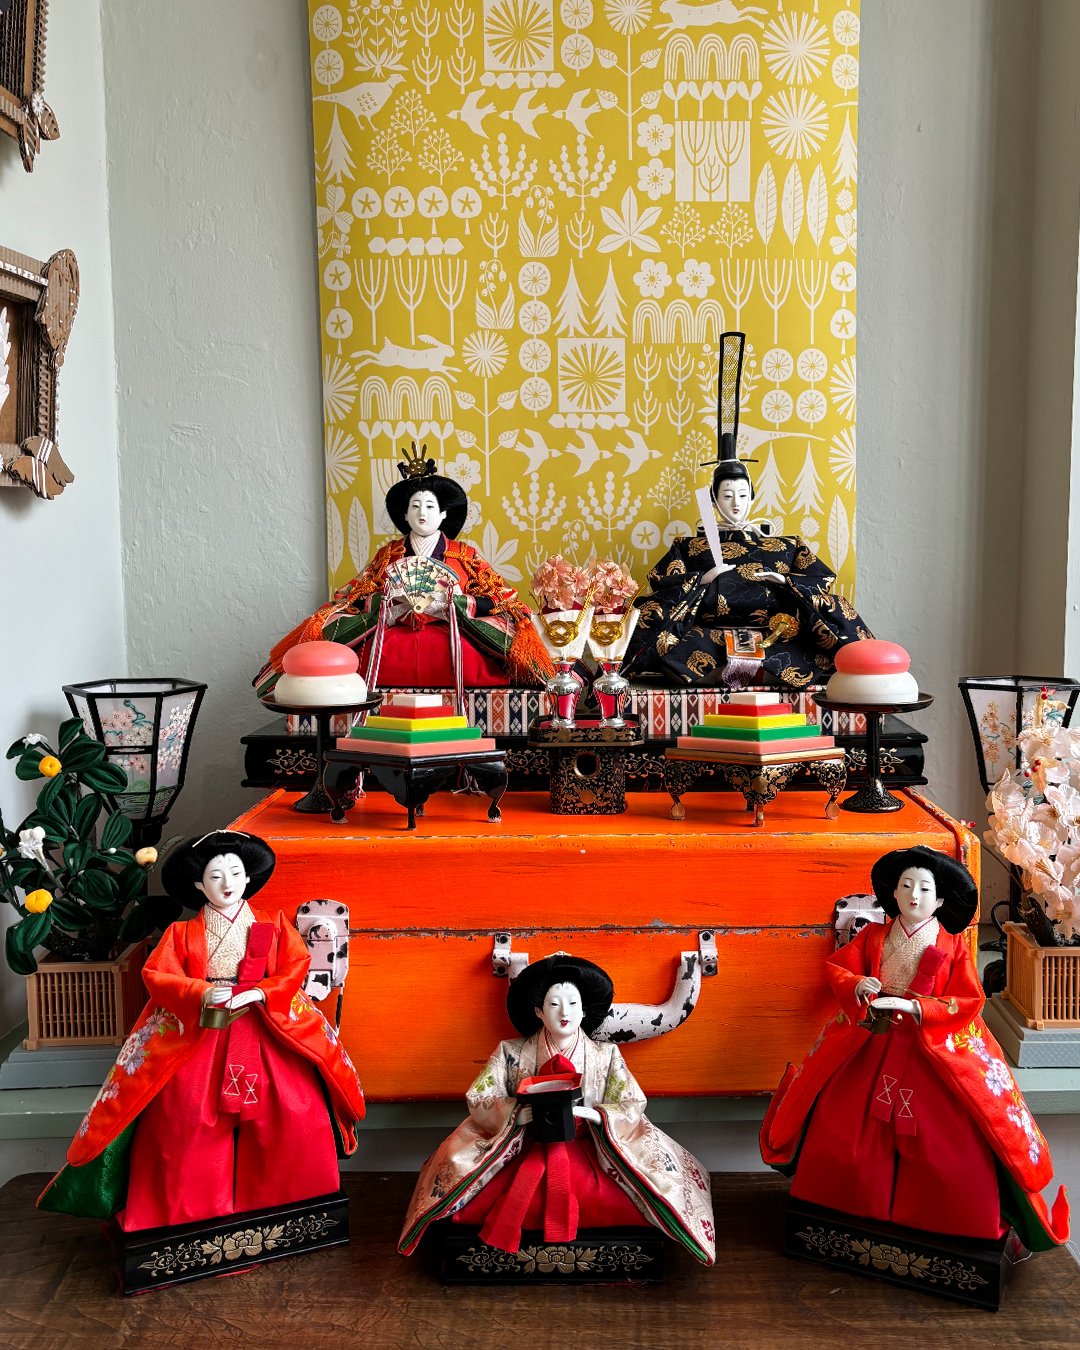 It's Hinamatsuri!

On the 3rd of March, it's 'Hinamatsuri', or 'Girls Day', in Japan. This is a celebration where a set of dolls, called 'hina-ningyo', are displayed to celebrate the health, prosperity and happiness of girls in the family. This parti